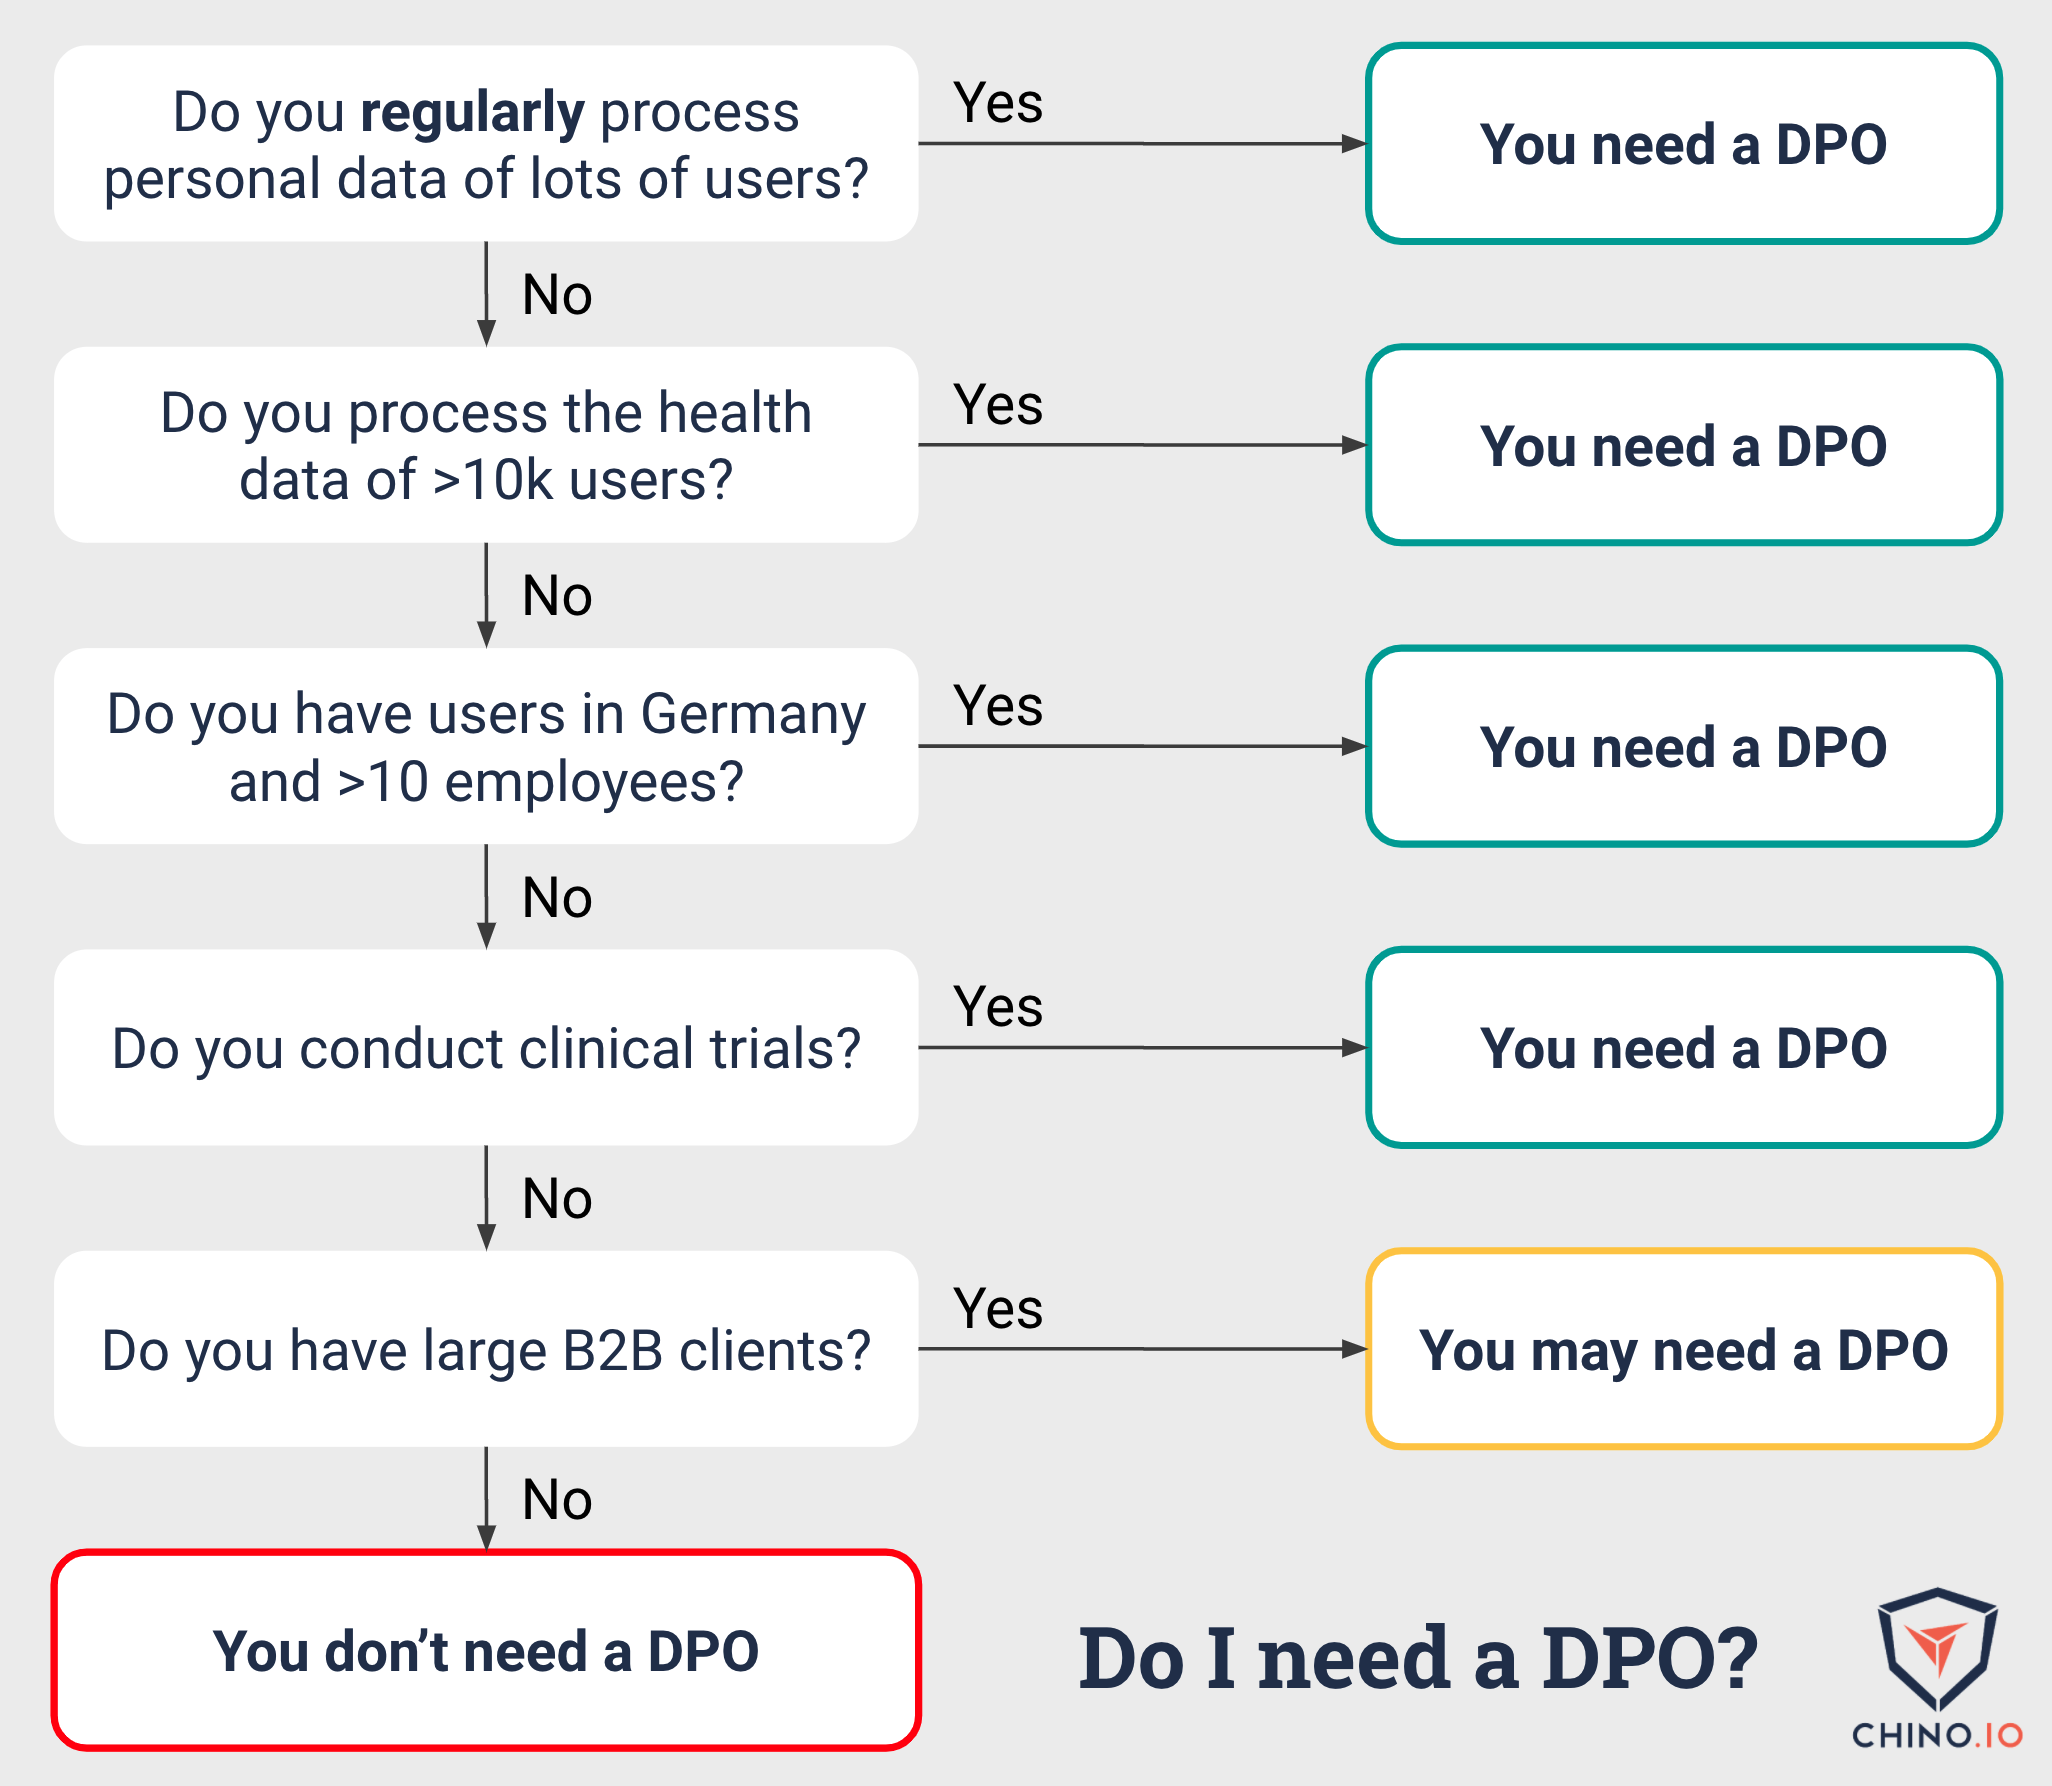 Do I need to appoint a DPO?